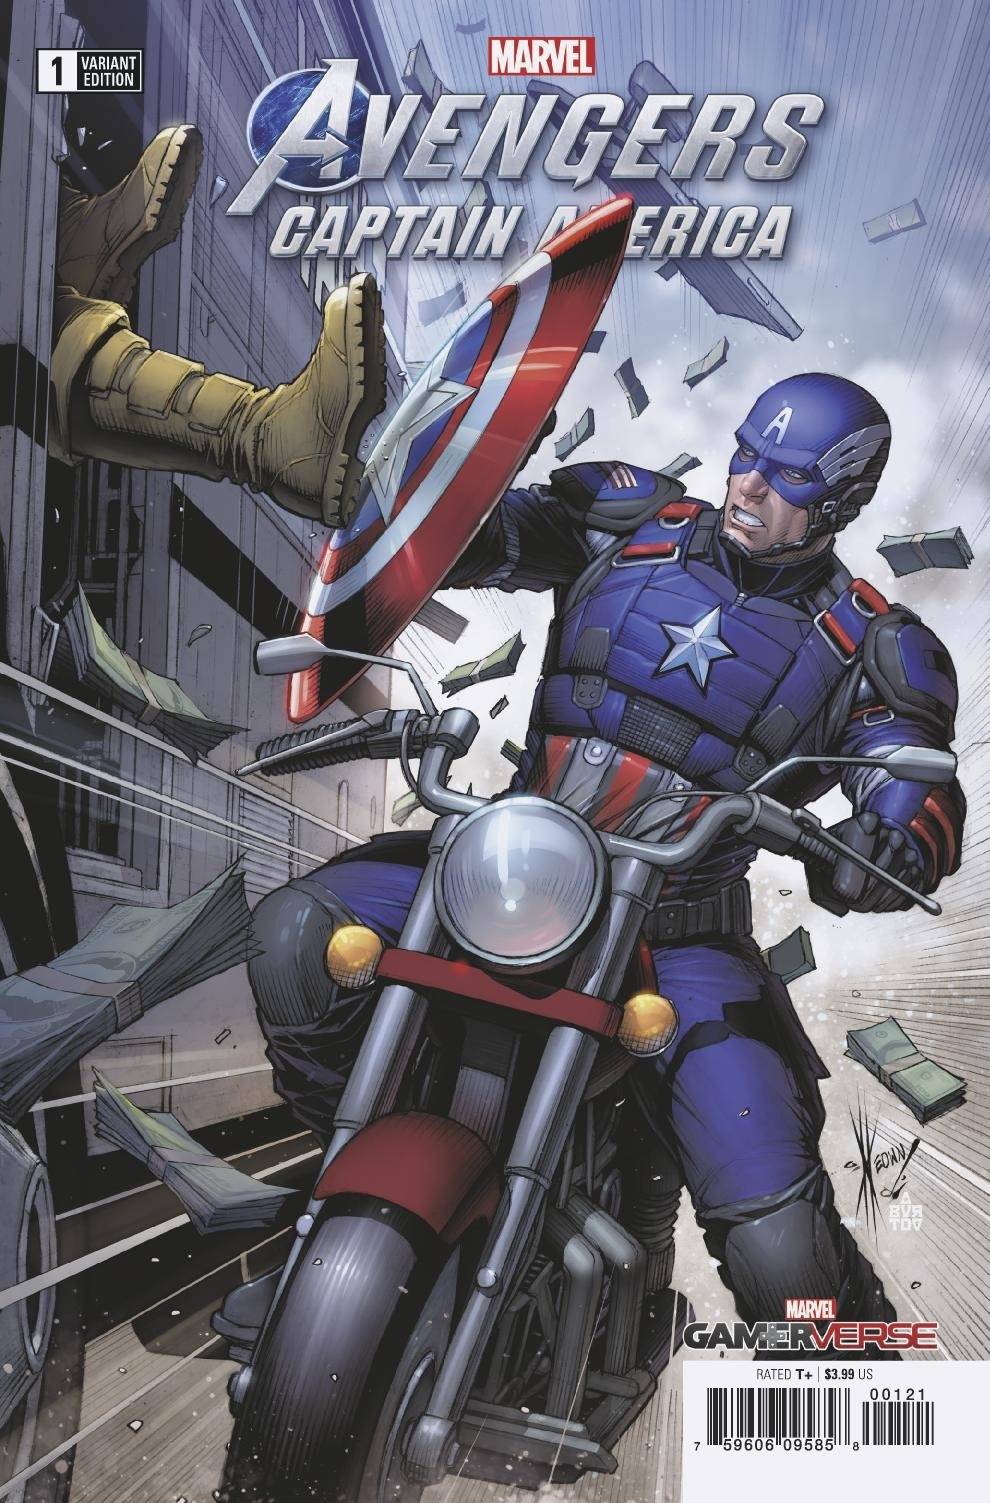 Marvels Avengers Captain America 1 - Heroes Cave